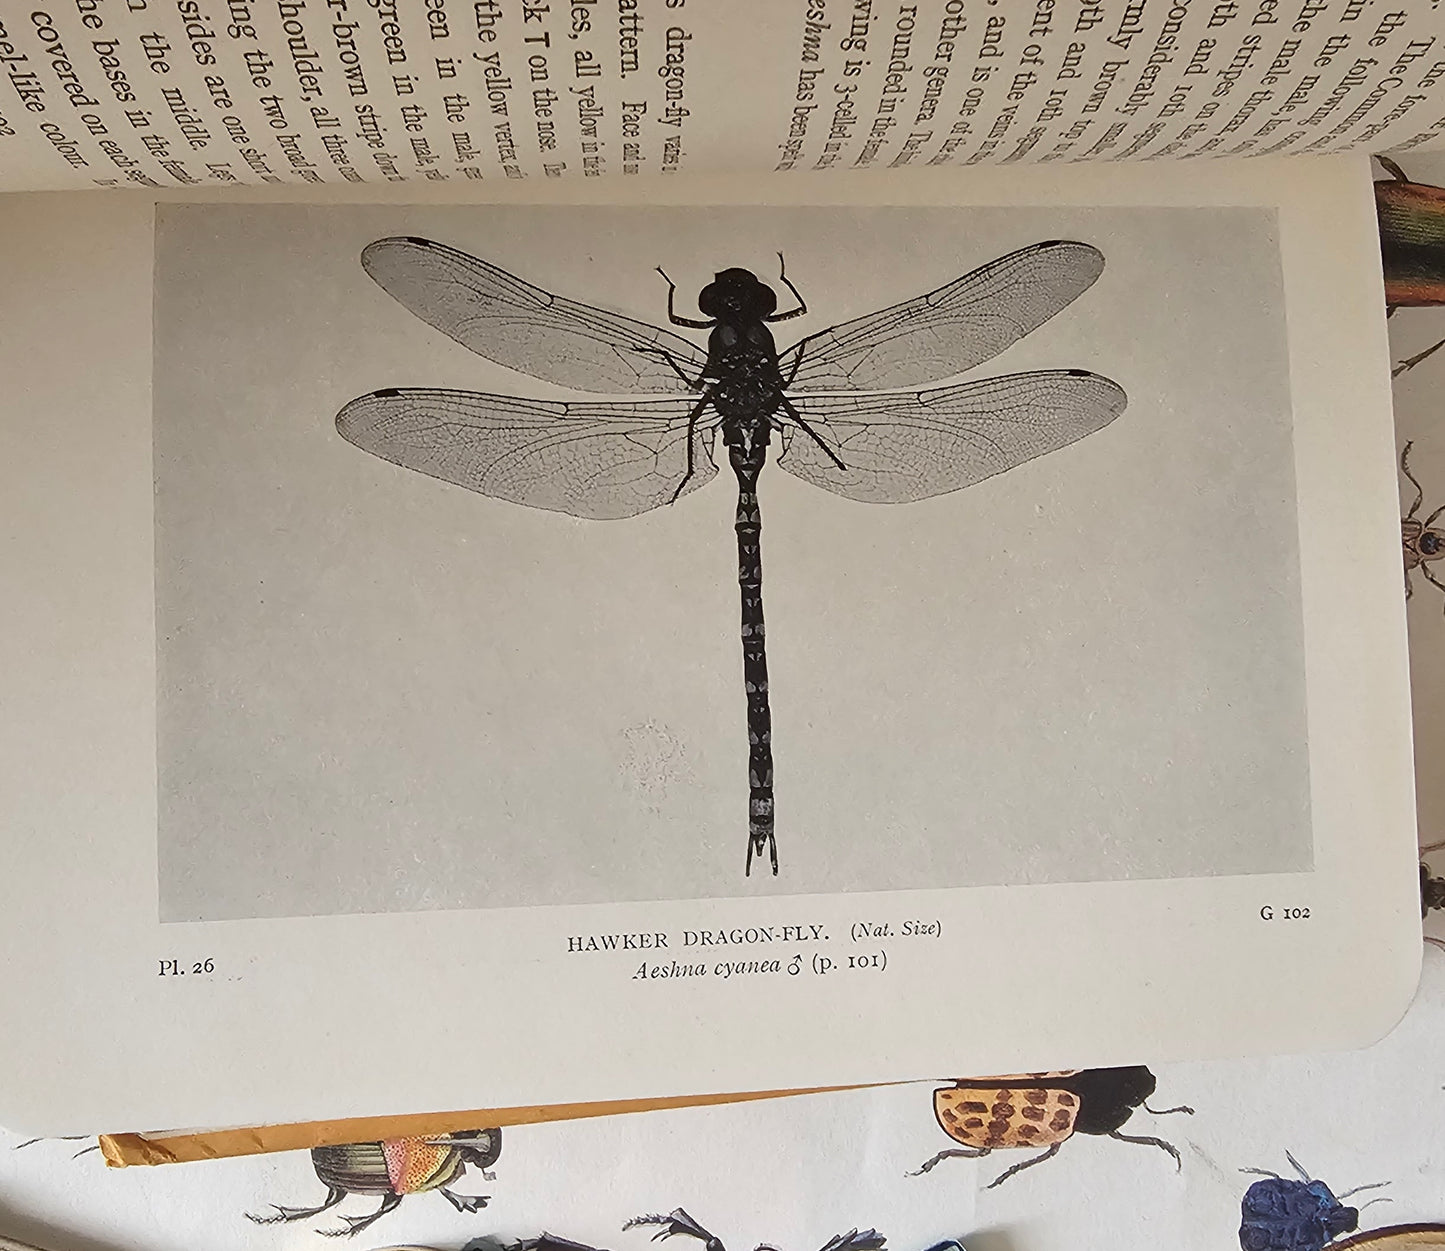 1949 The Dragonflies of the British Isles by Cynthia Longfield / Warne, London / Scarce Dust Wrapper / Richly Illustrated / Good Condition